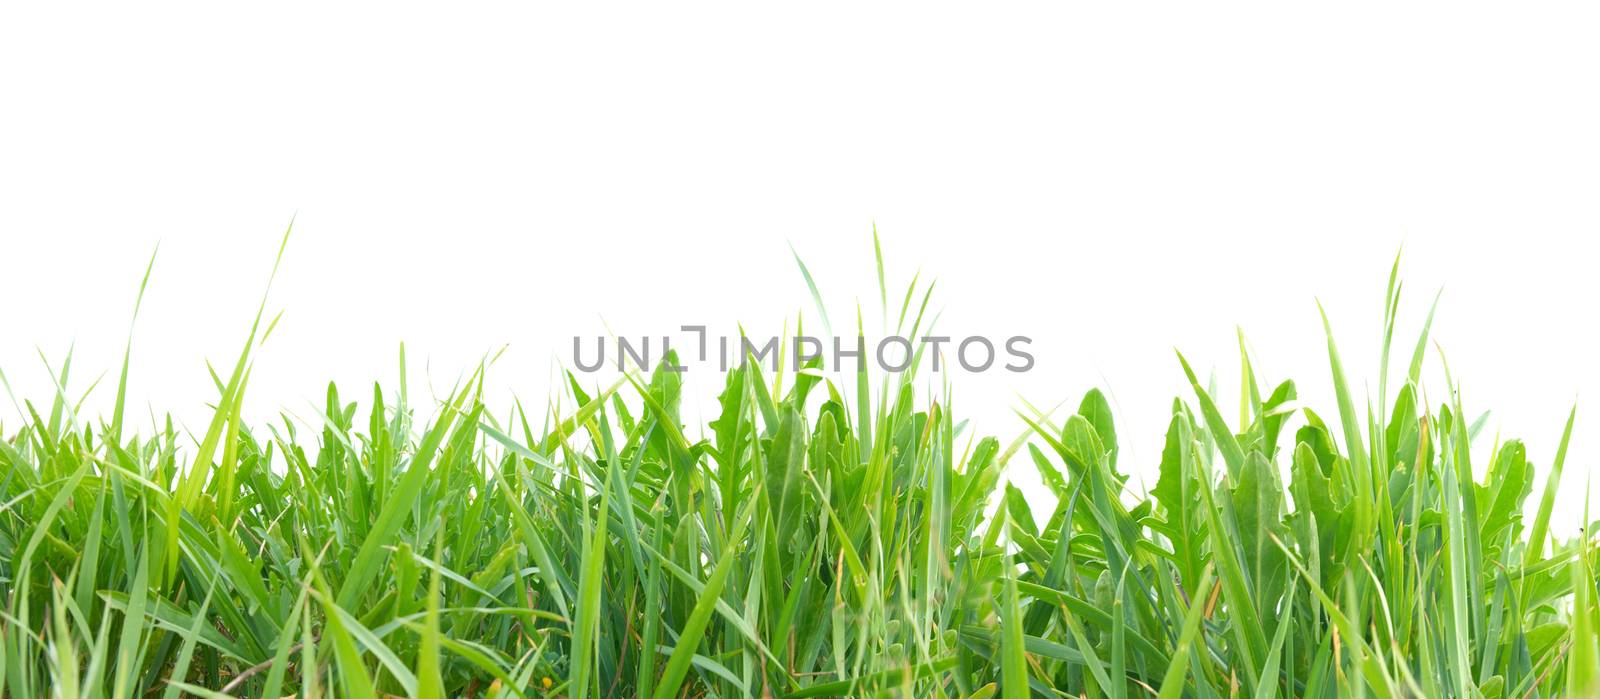 Green grass isolated on the white background